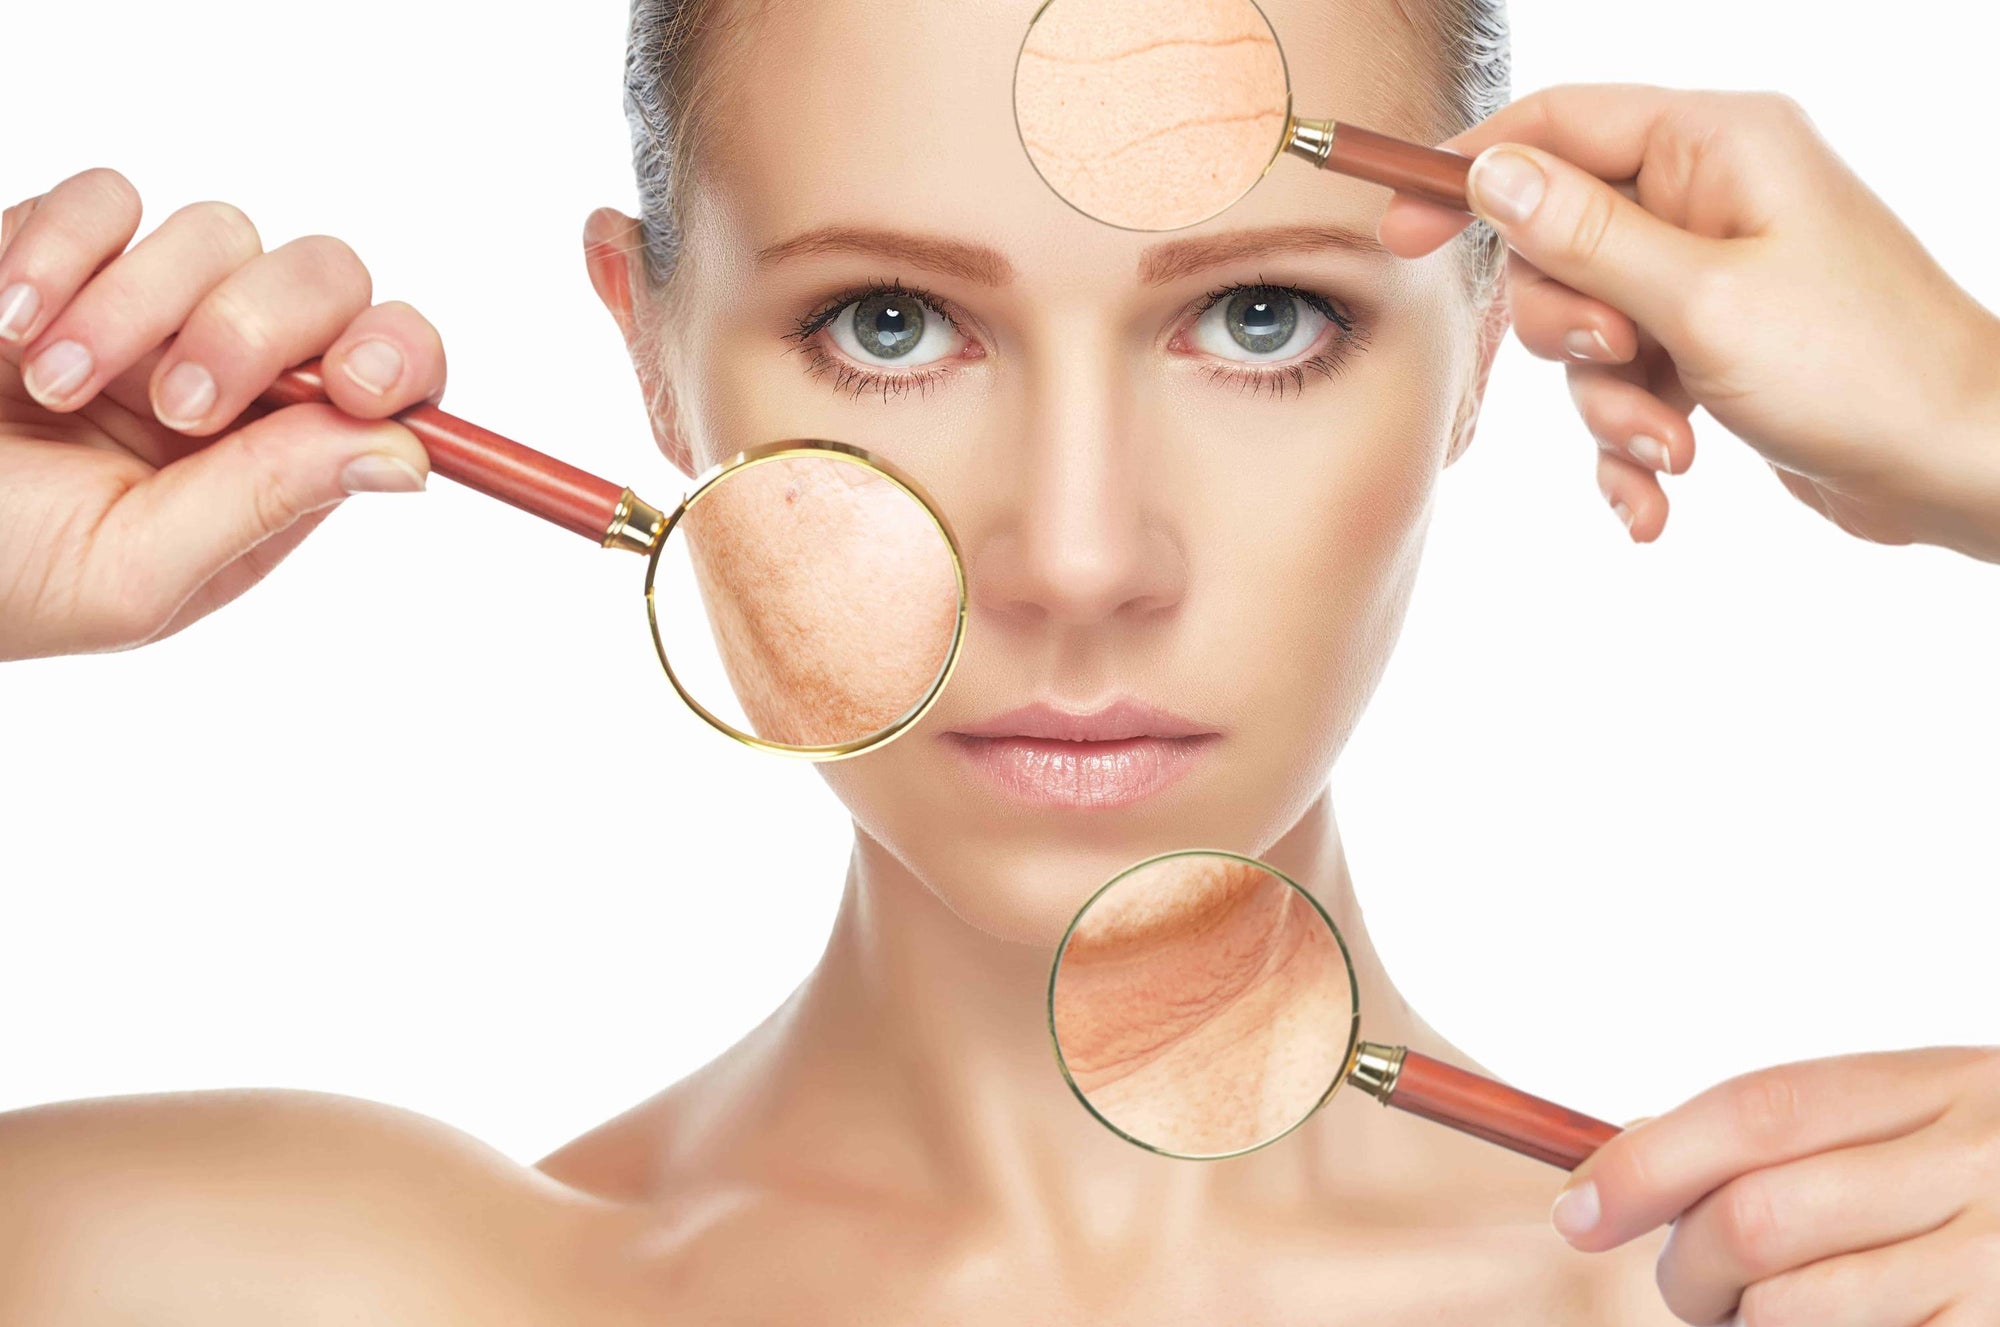 The basics of treating fine lines and wrinkles